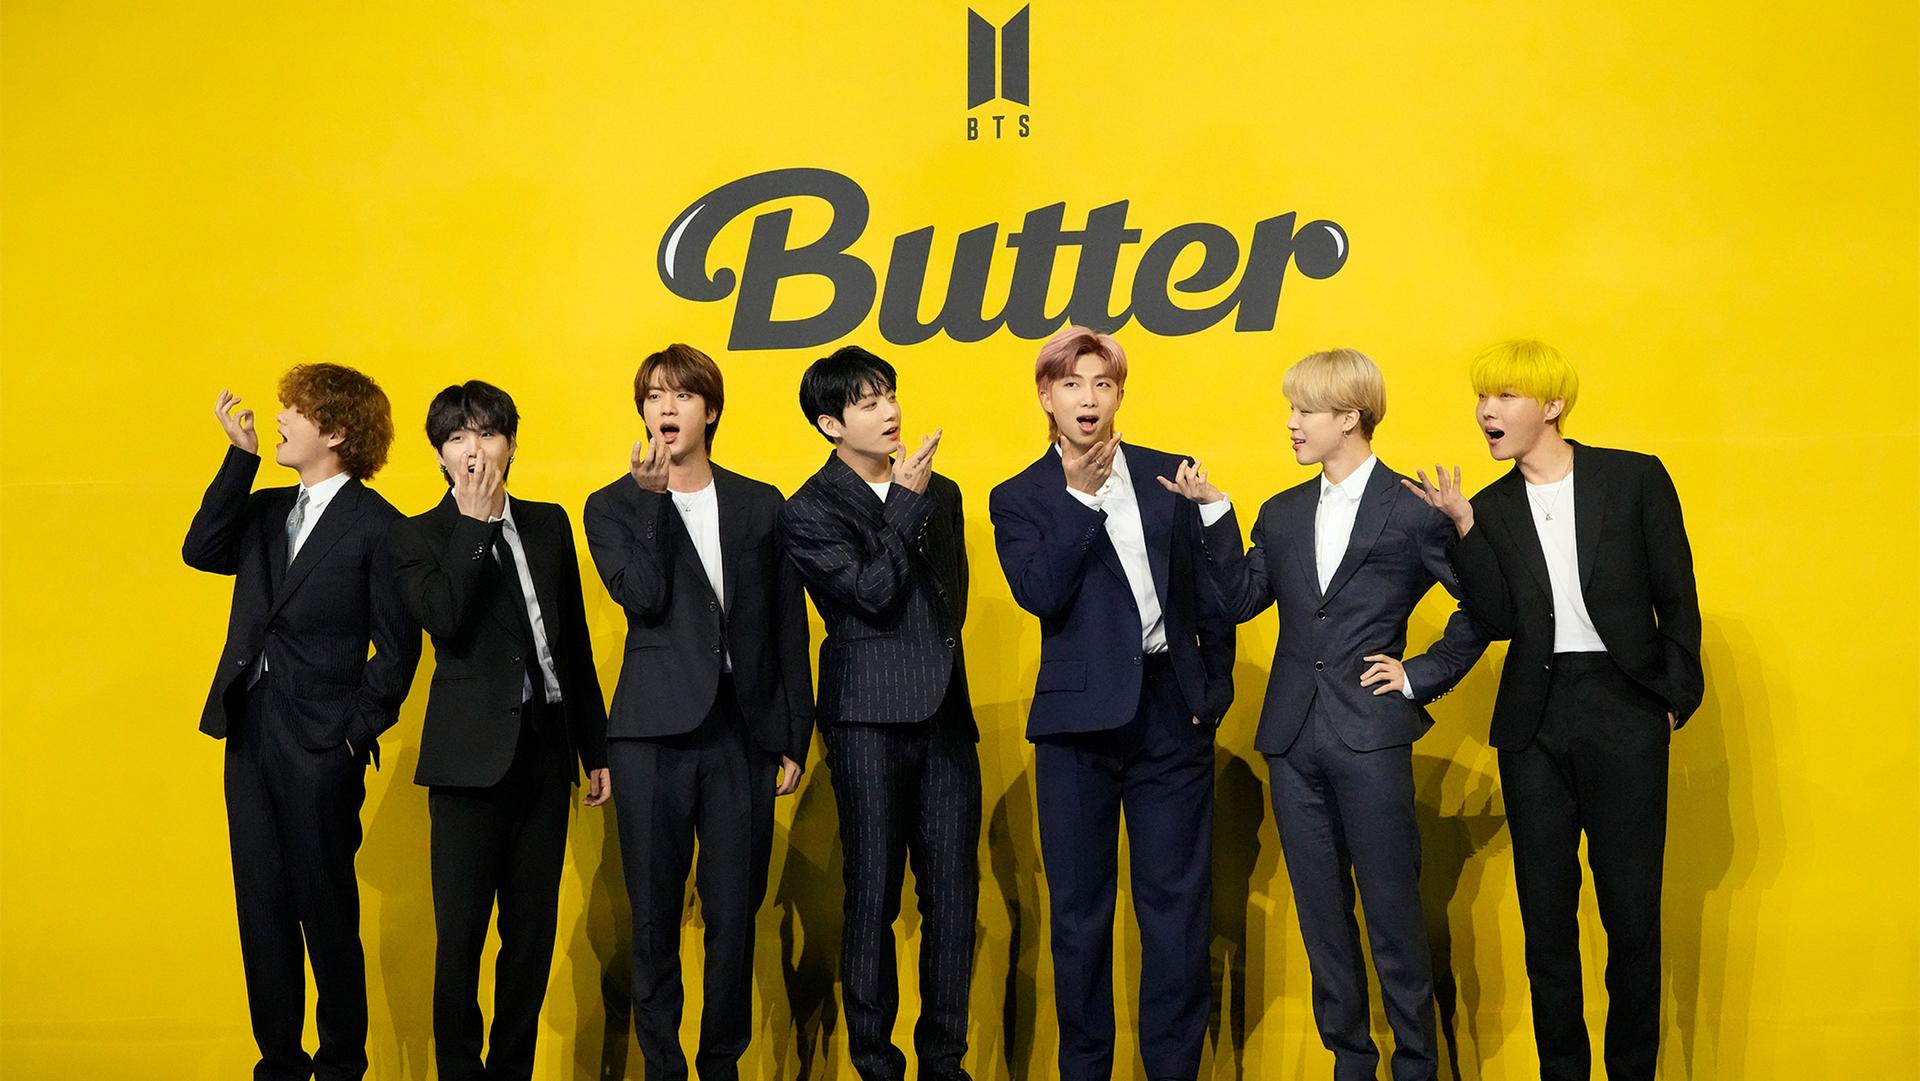 Seven members of K-pop band BTS stand wearing black suits in front of a yellow background that says "BTS Butter"